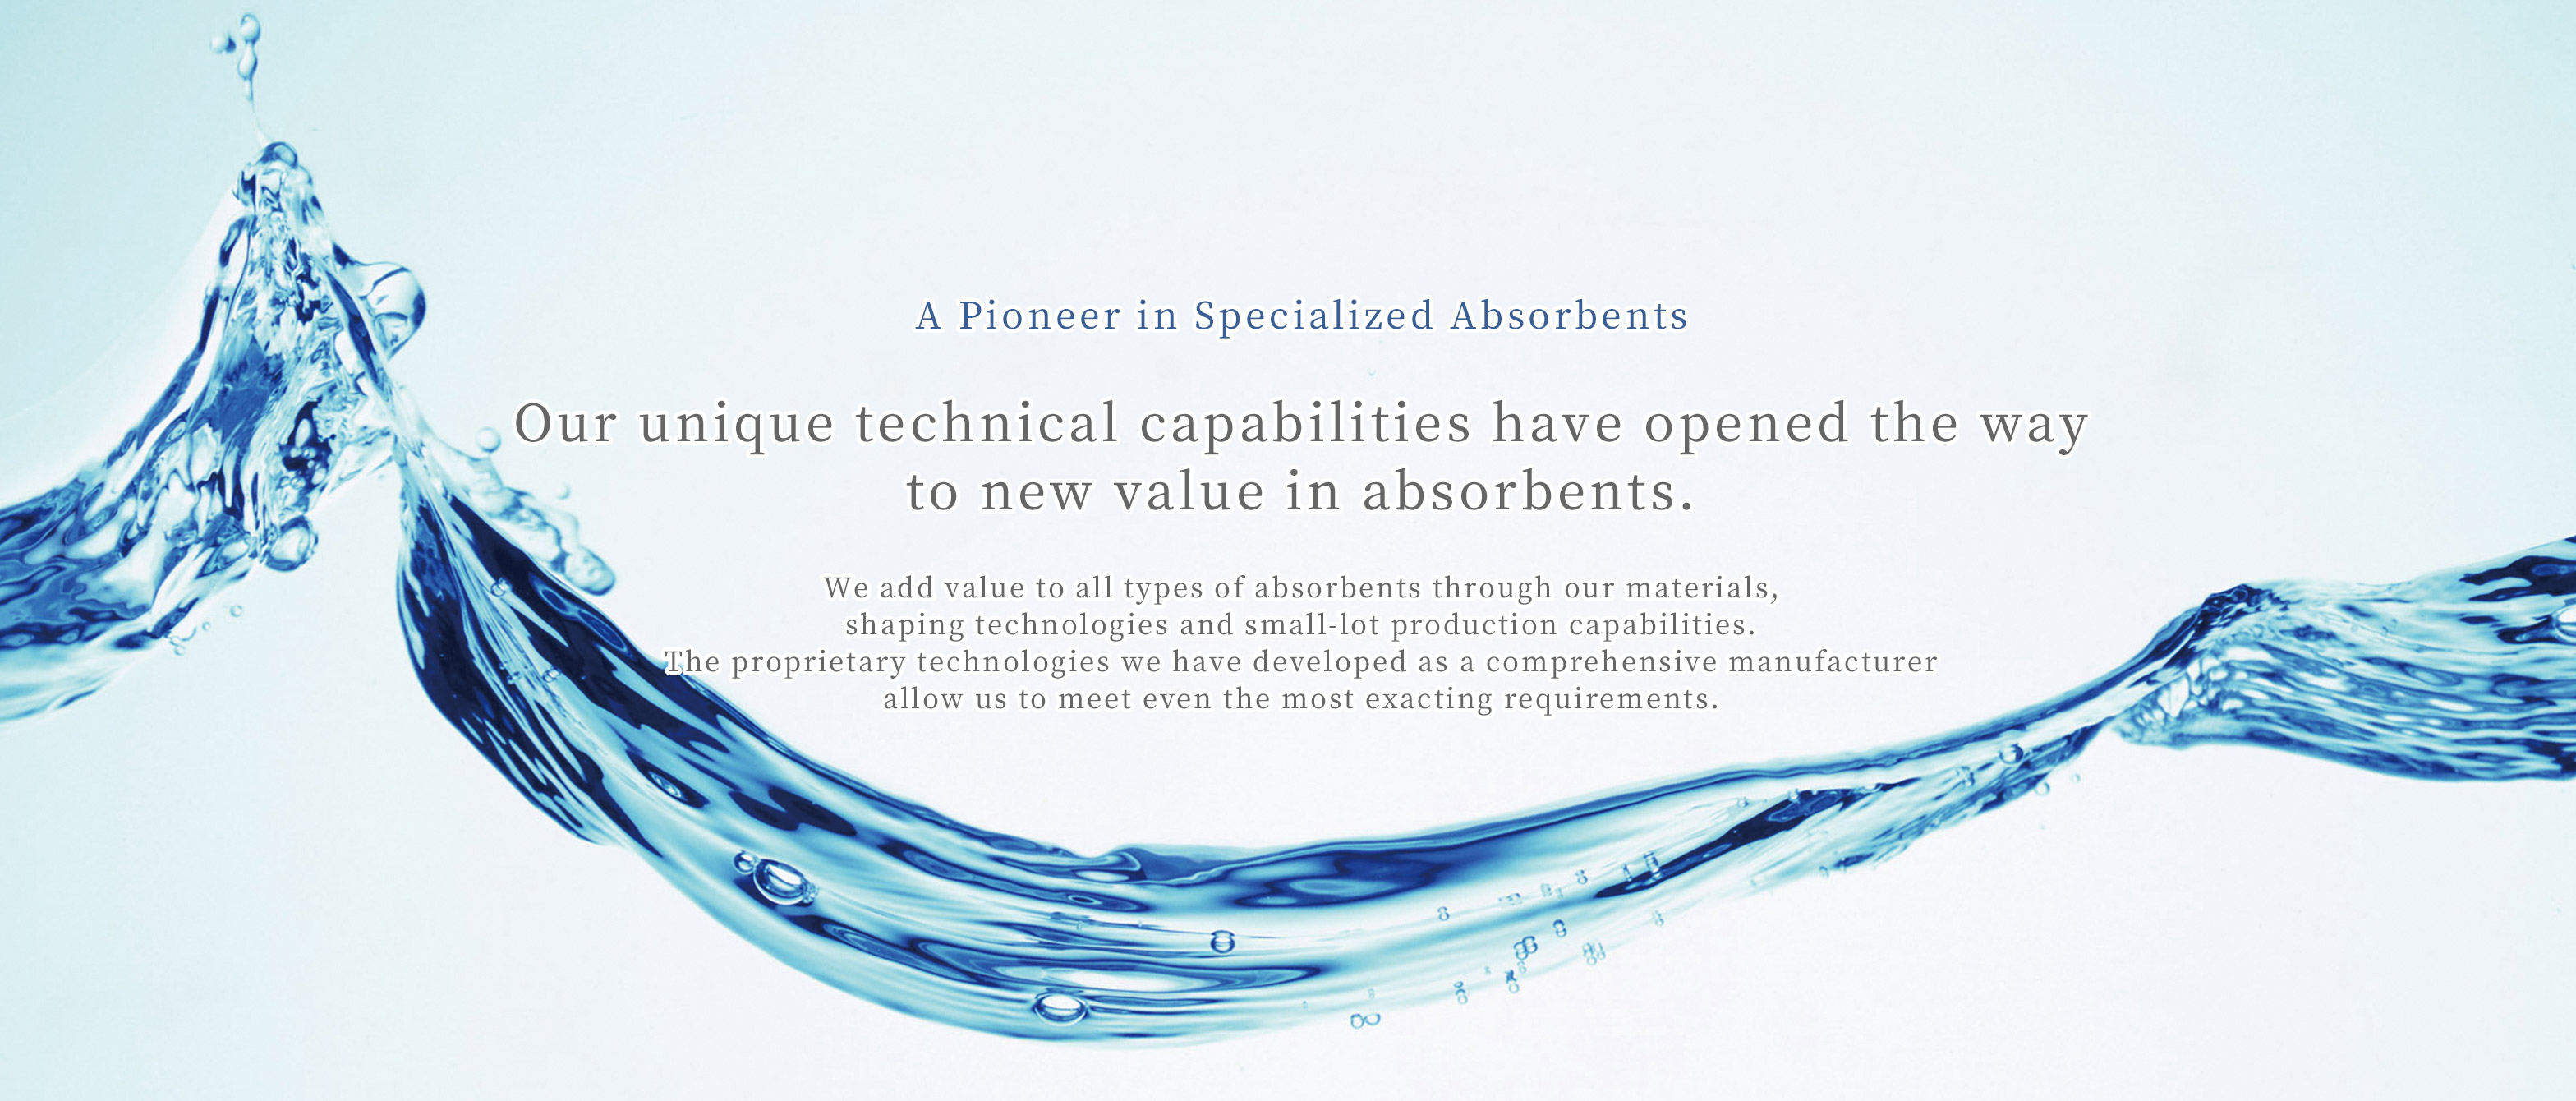 A Pioneer in Specialized Absorbents / Our unique technical capabilities have opened the way to new value in absorbents.